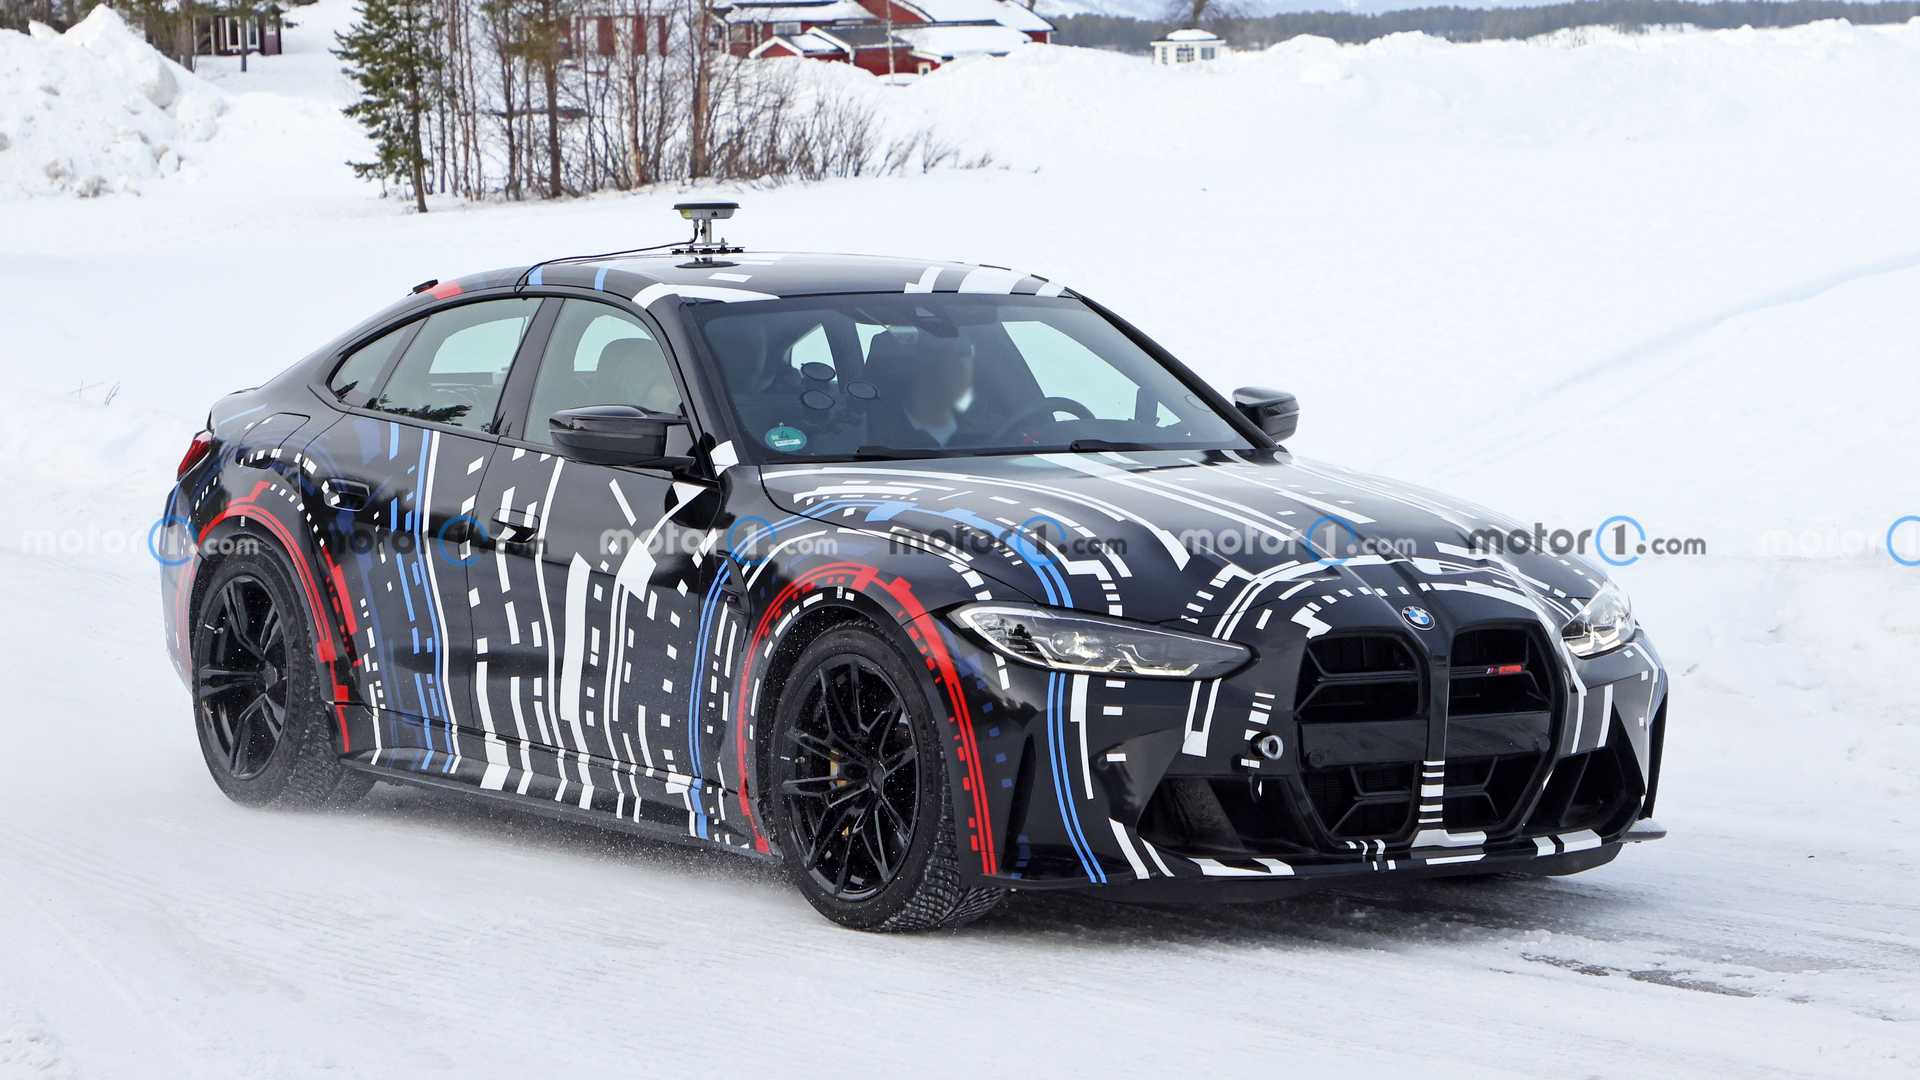 next-generation bmw m3 ev confirmed, will debut in 2027